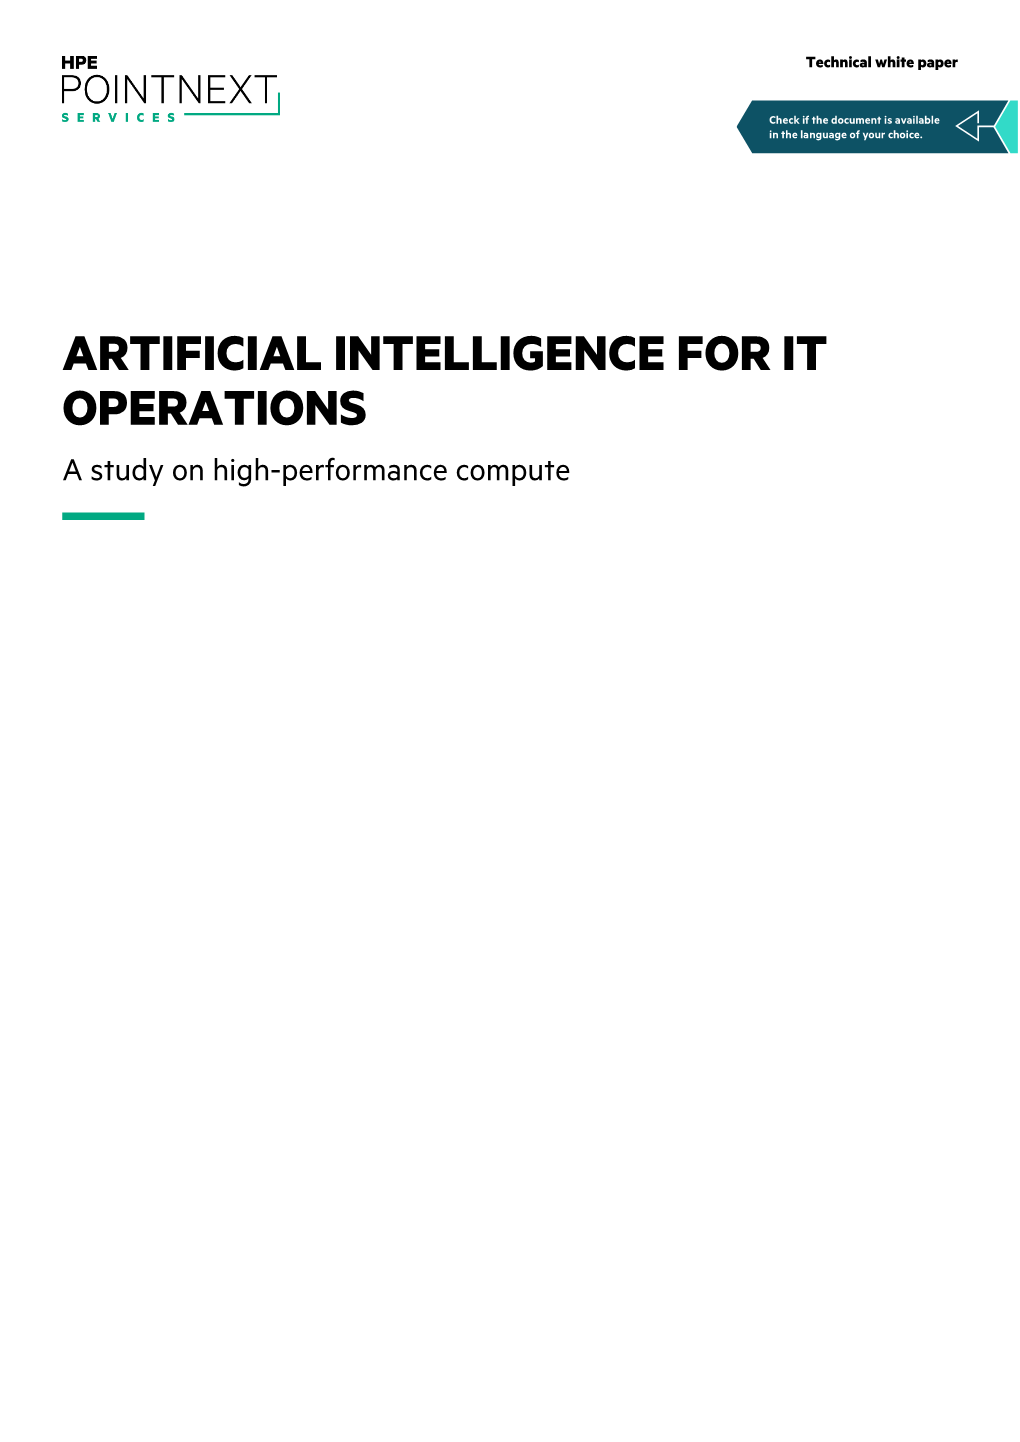 ARTIFICIAL INTELLIGENCE for IT OPERATIONS a Study on High-Performance Compute Technical White Paper